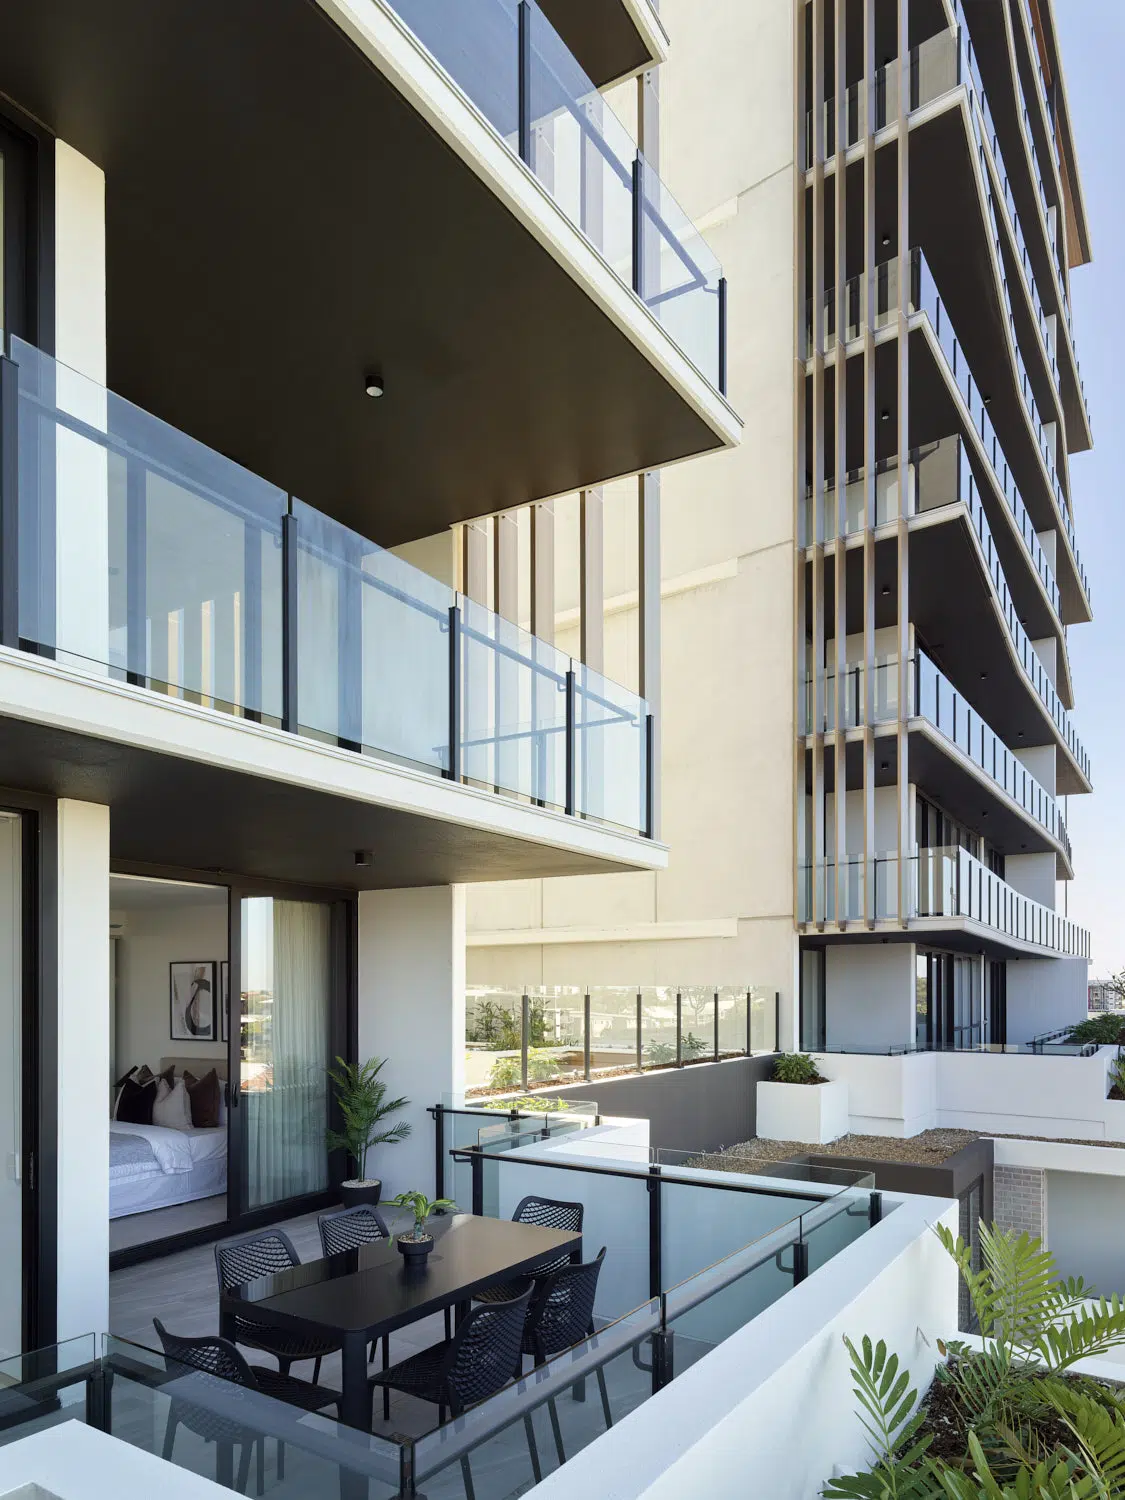 SPARKES STREET APARTMENTS FOR TOMKINS